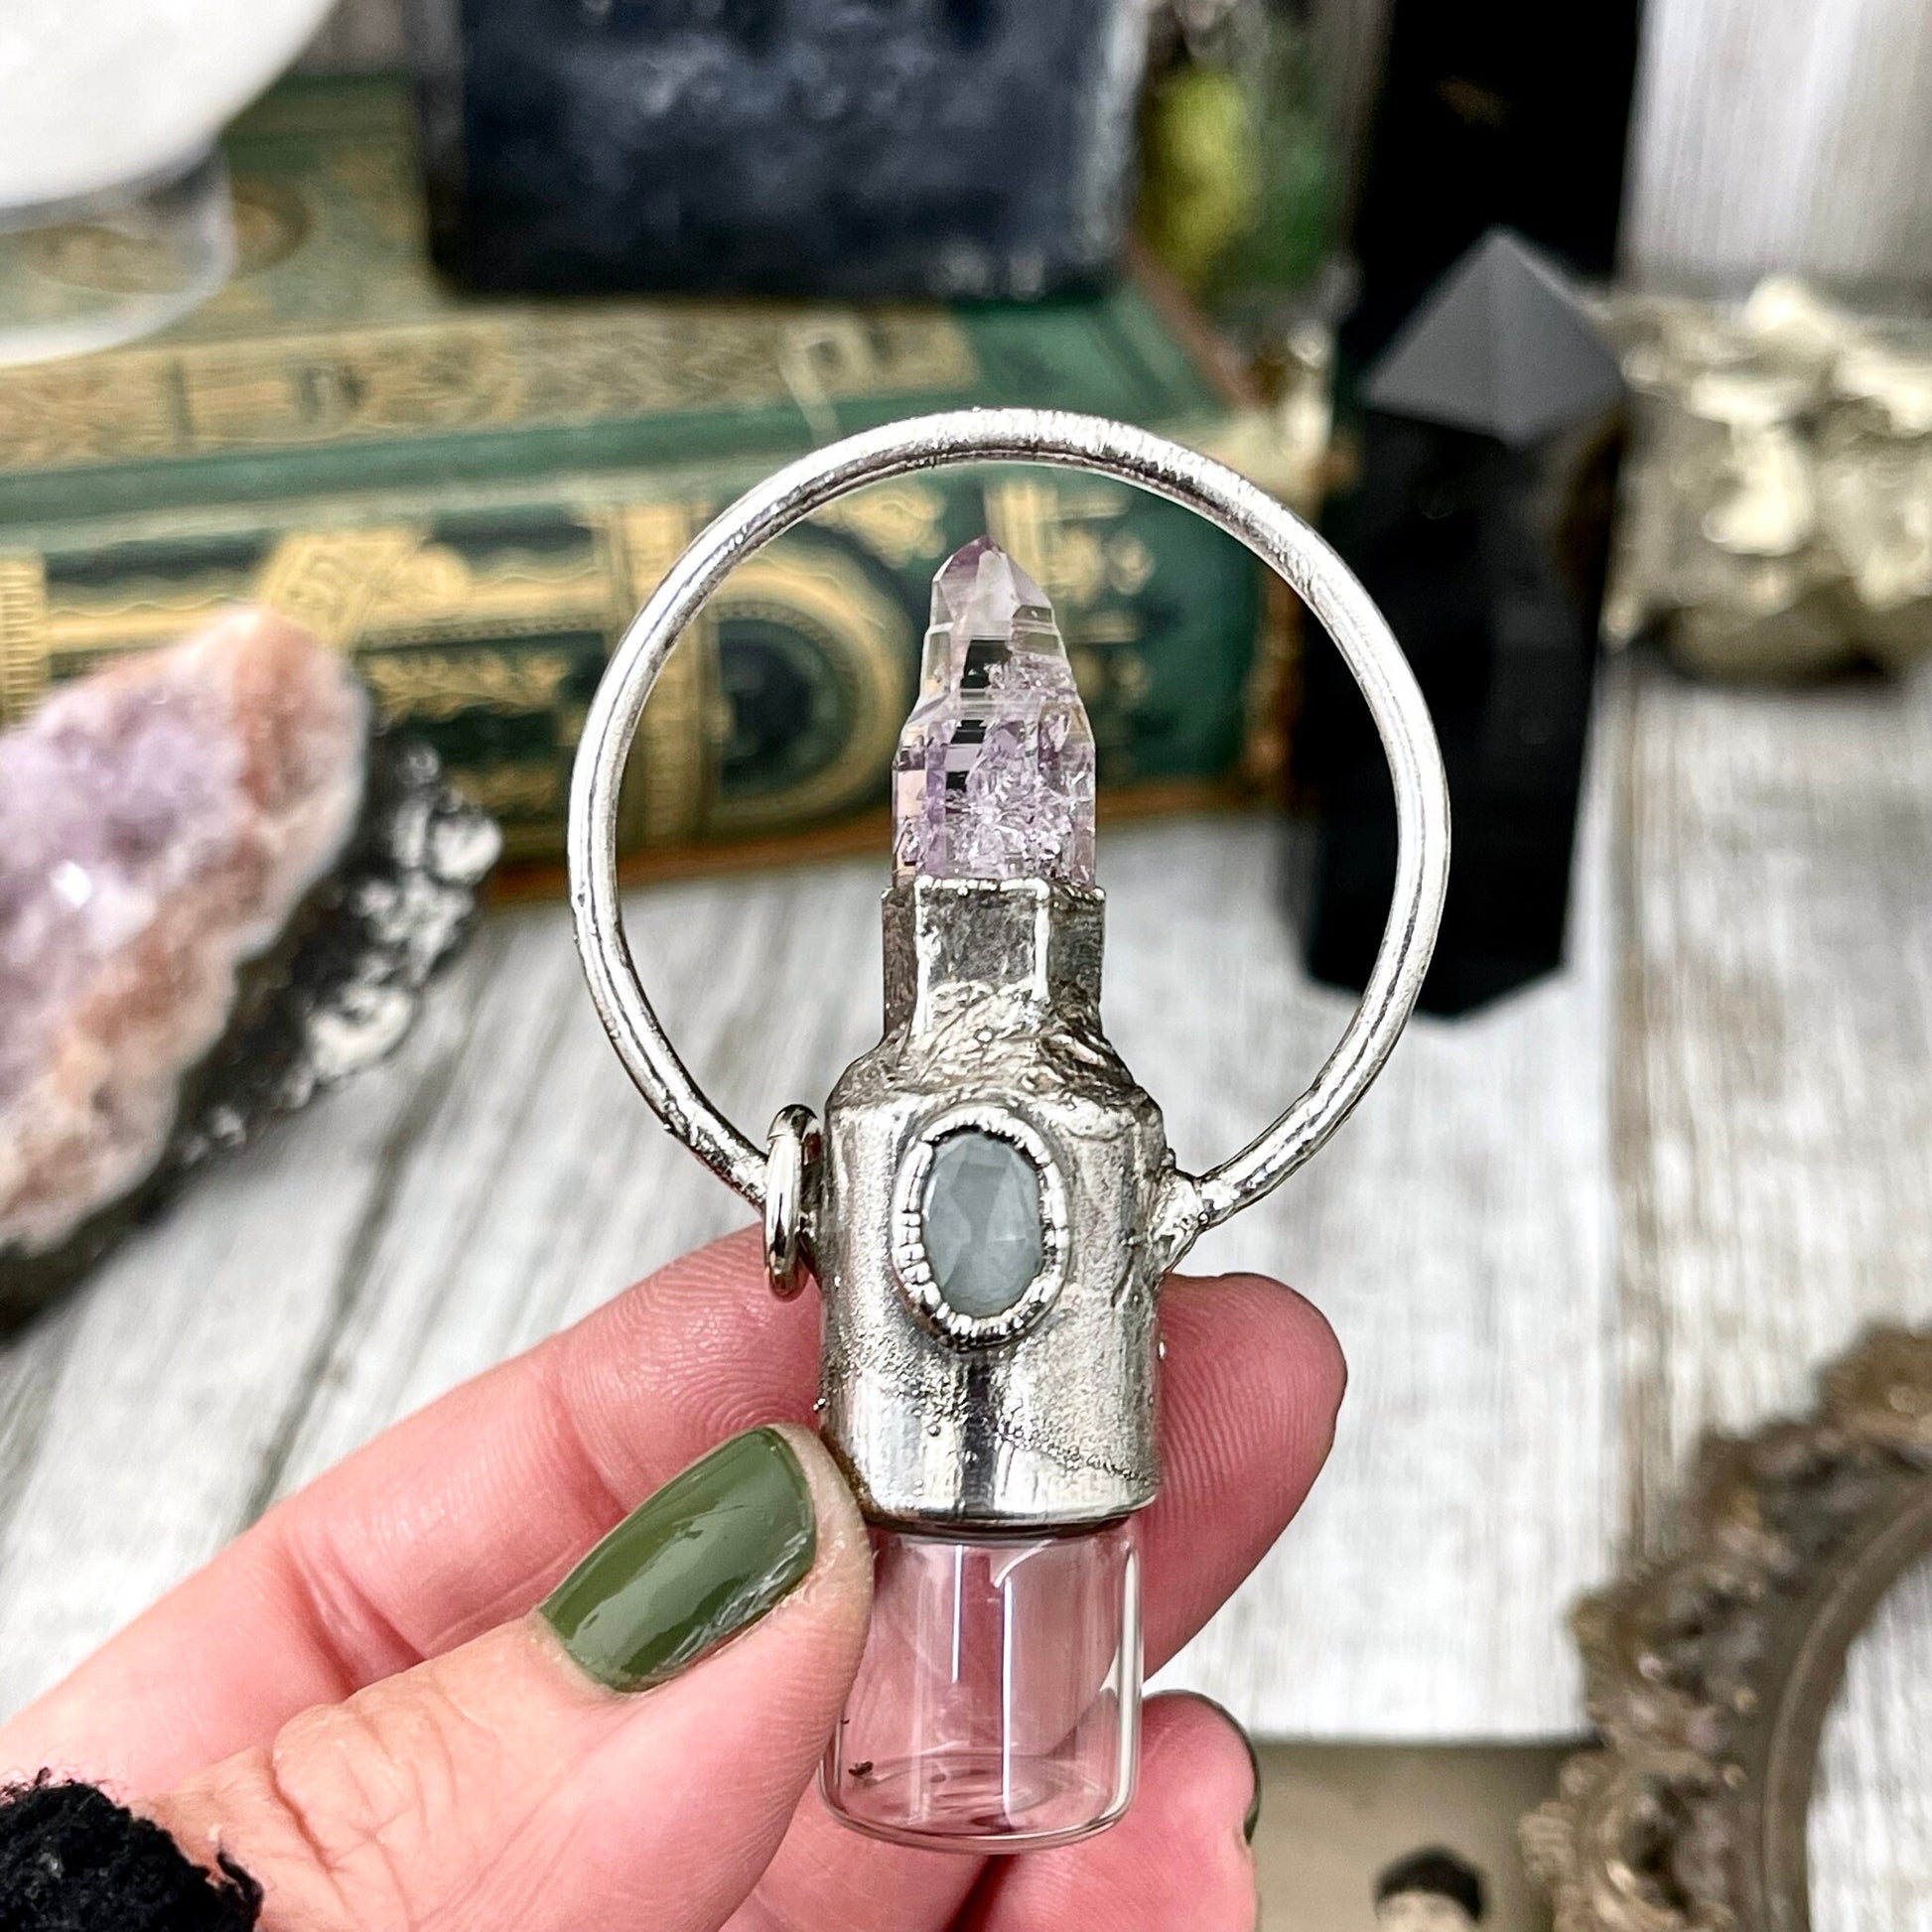 Raw Vera Cruz Amethyst and Aquamarine Crystal Necklace / Silver Crystal Rollerball Necklace / Foxlark - One of a Kind / Gothic Jewelry